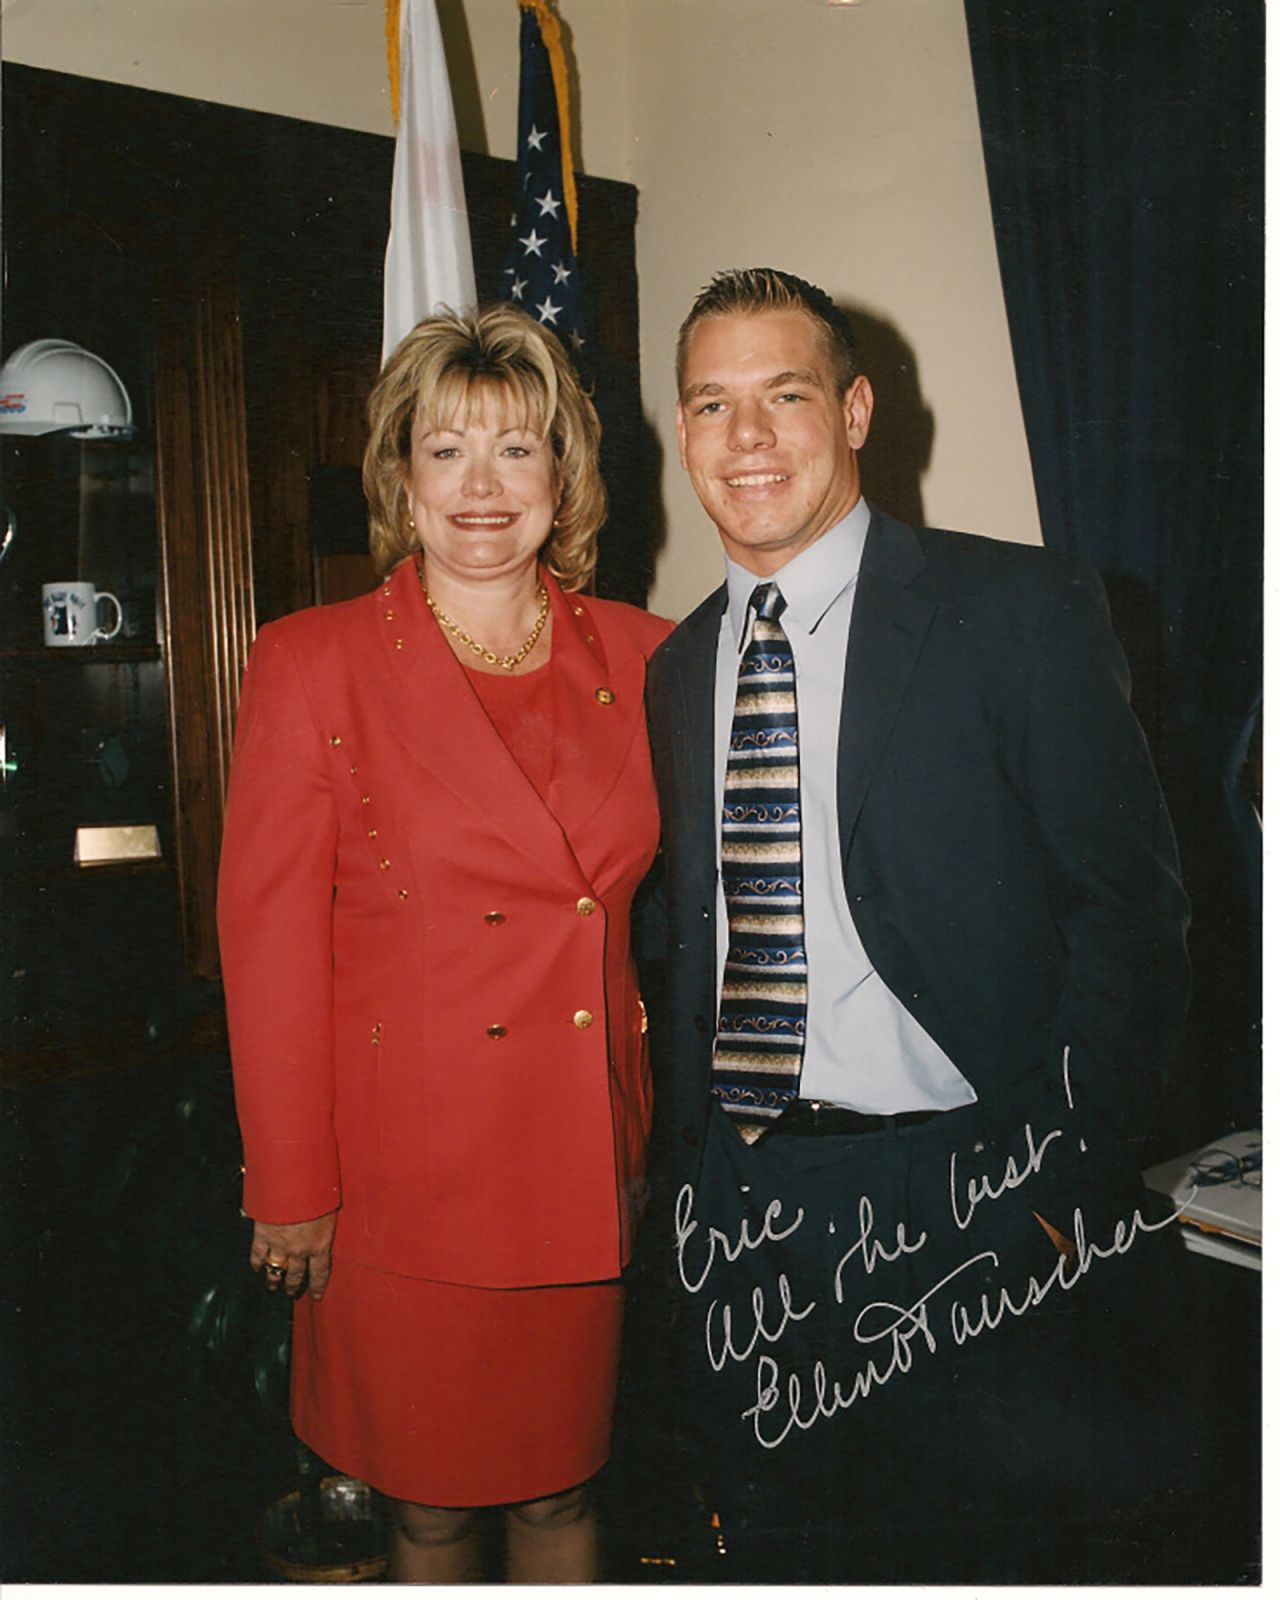 Swalwell was an intern for US Rep. Ellen Tauscher in 2001 and 2002.